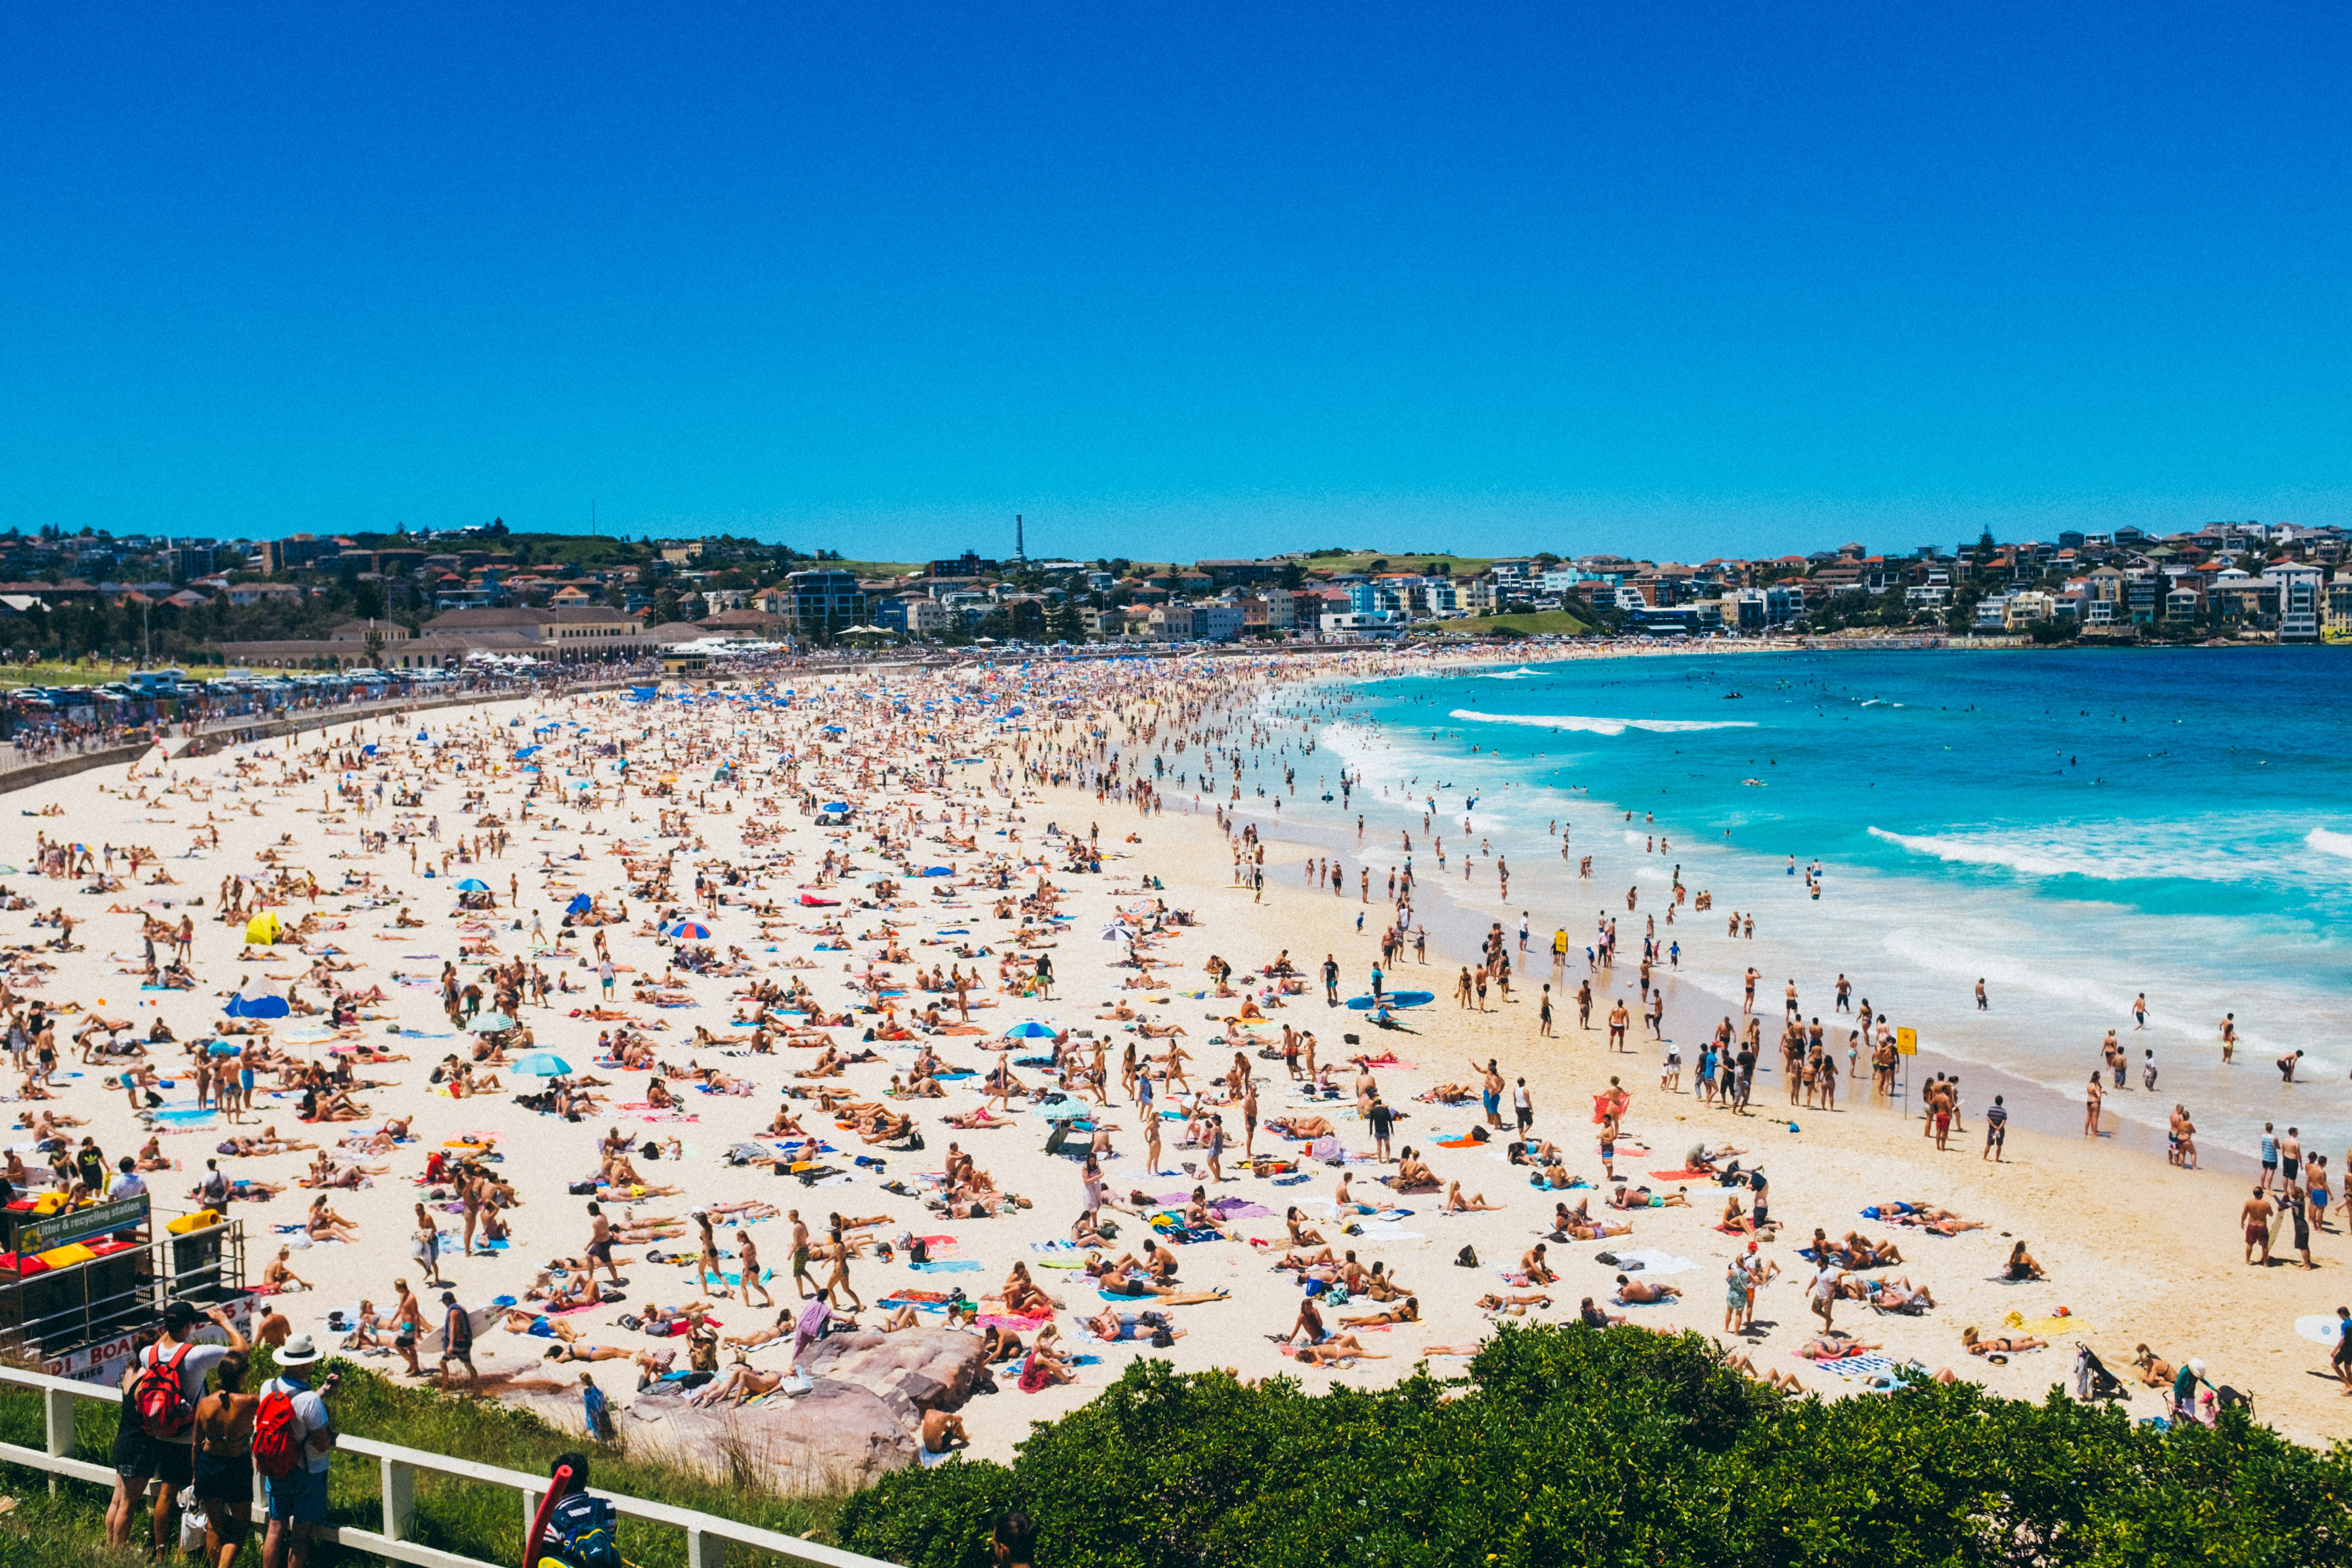 Baltic Beach Nudism - Iconic Sydney beach to become a nude beach for the first time in history -  NZ Herald